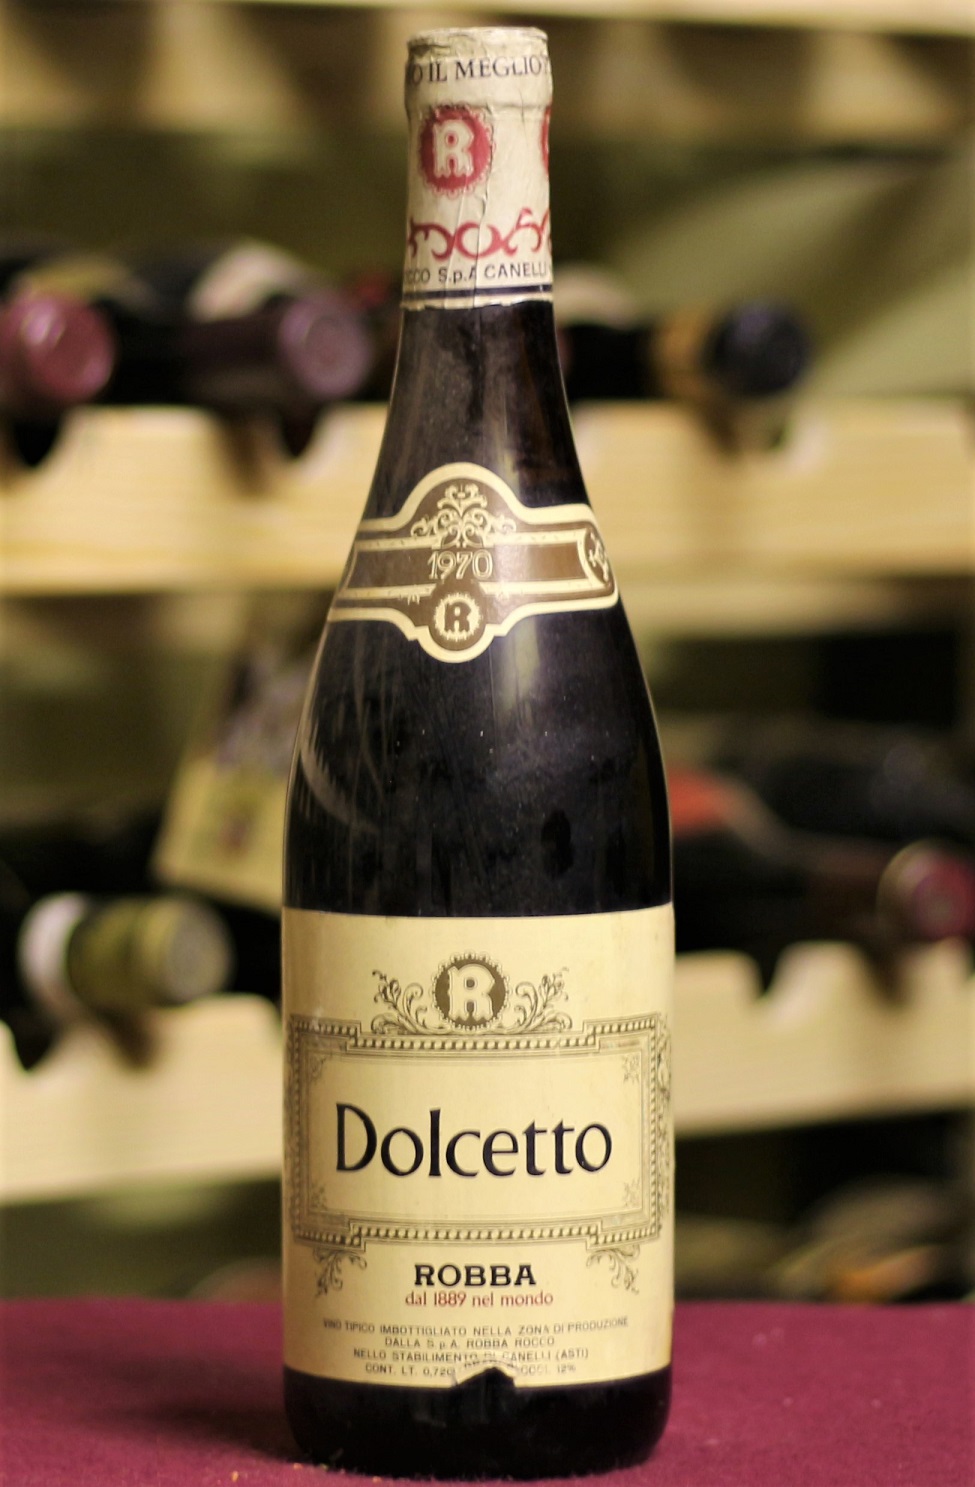 Dolcetto Robba 1970 года